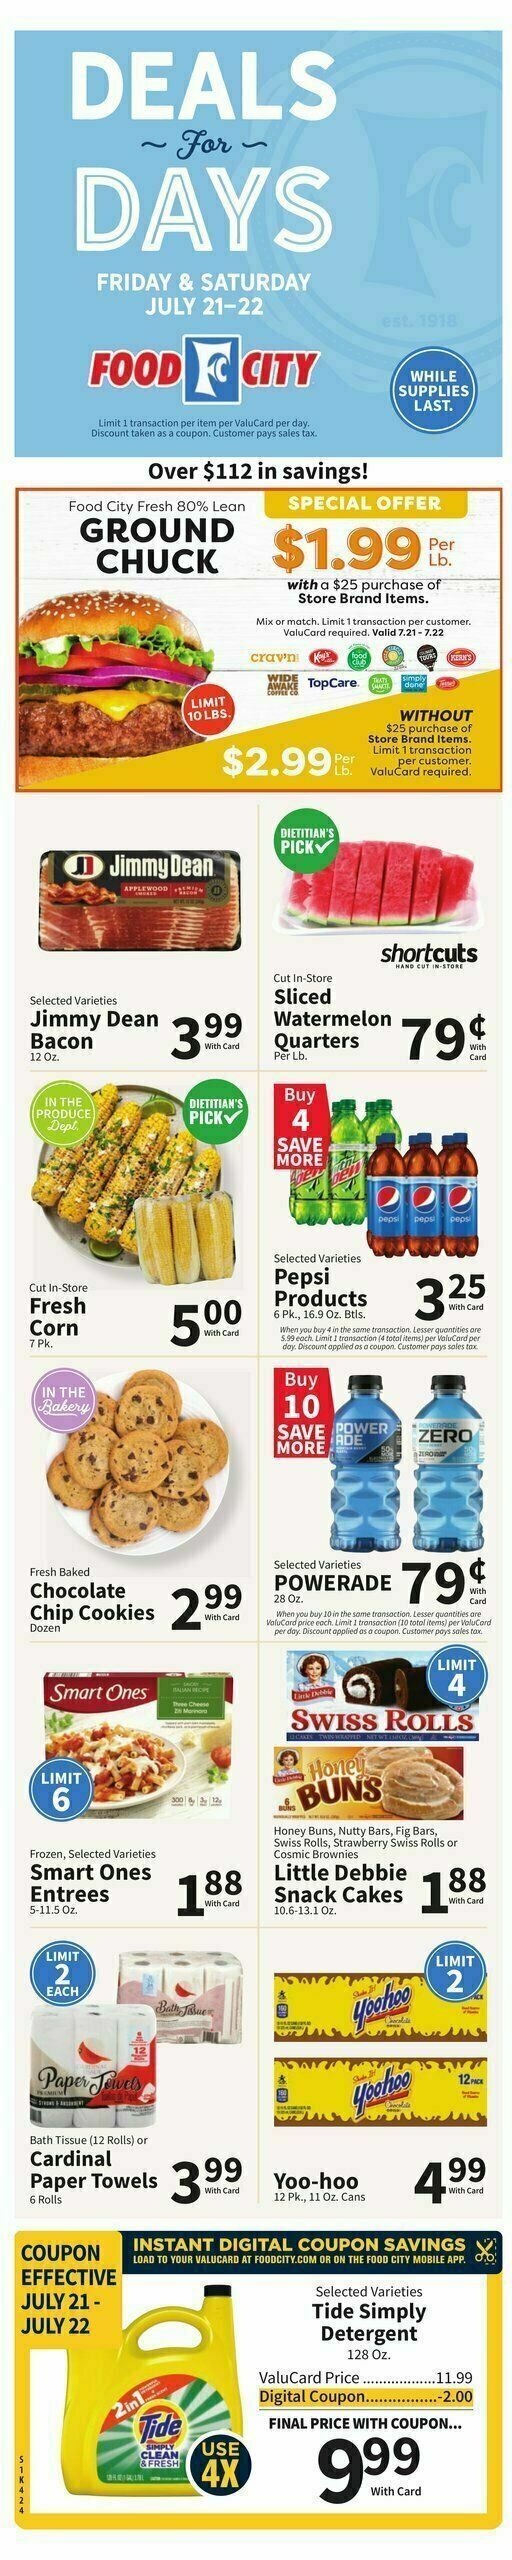 Food City Weekly Ad from July 19